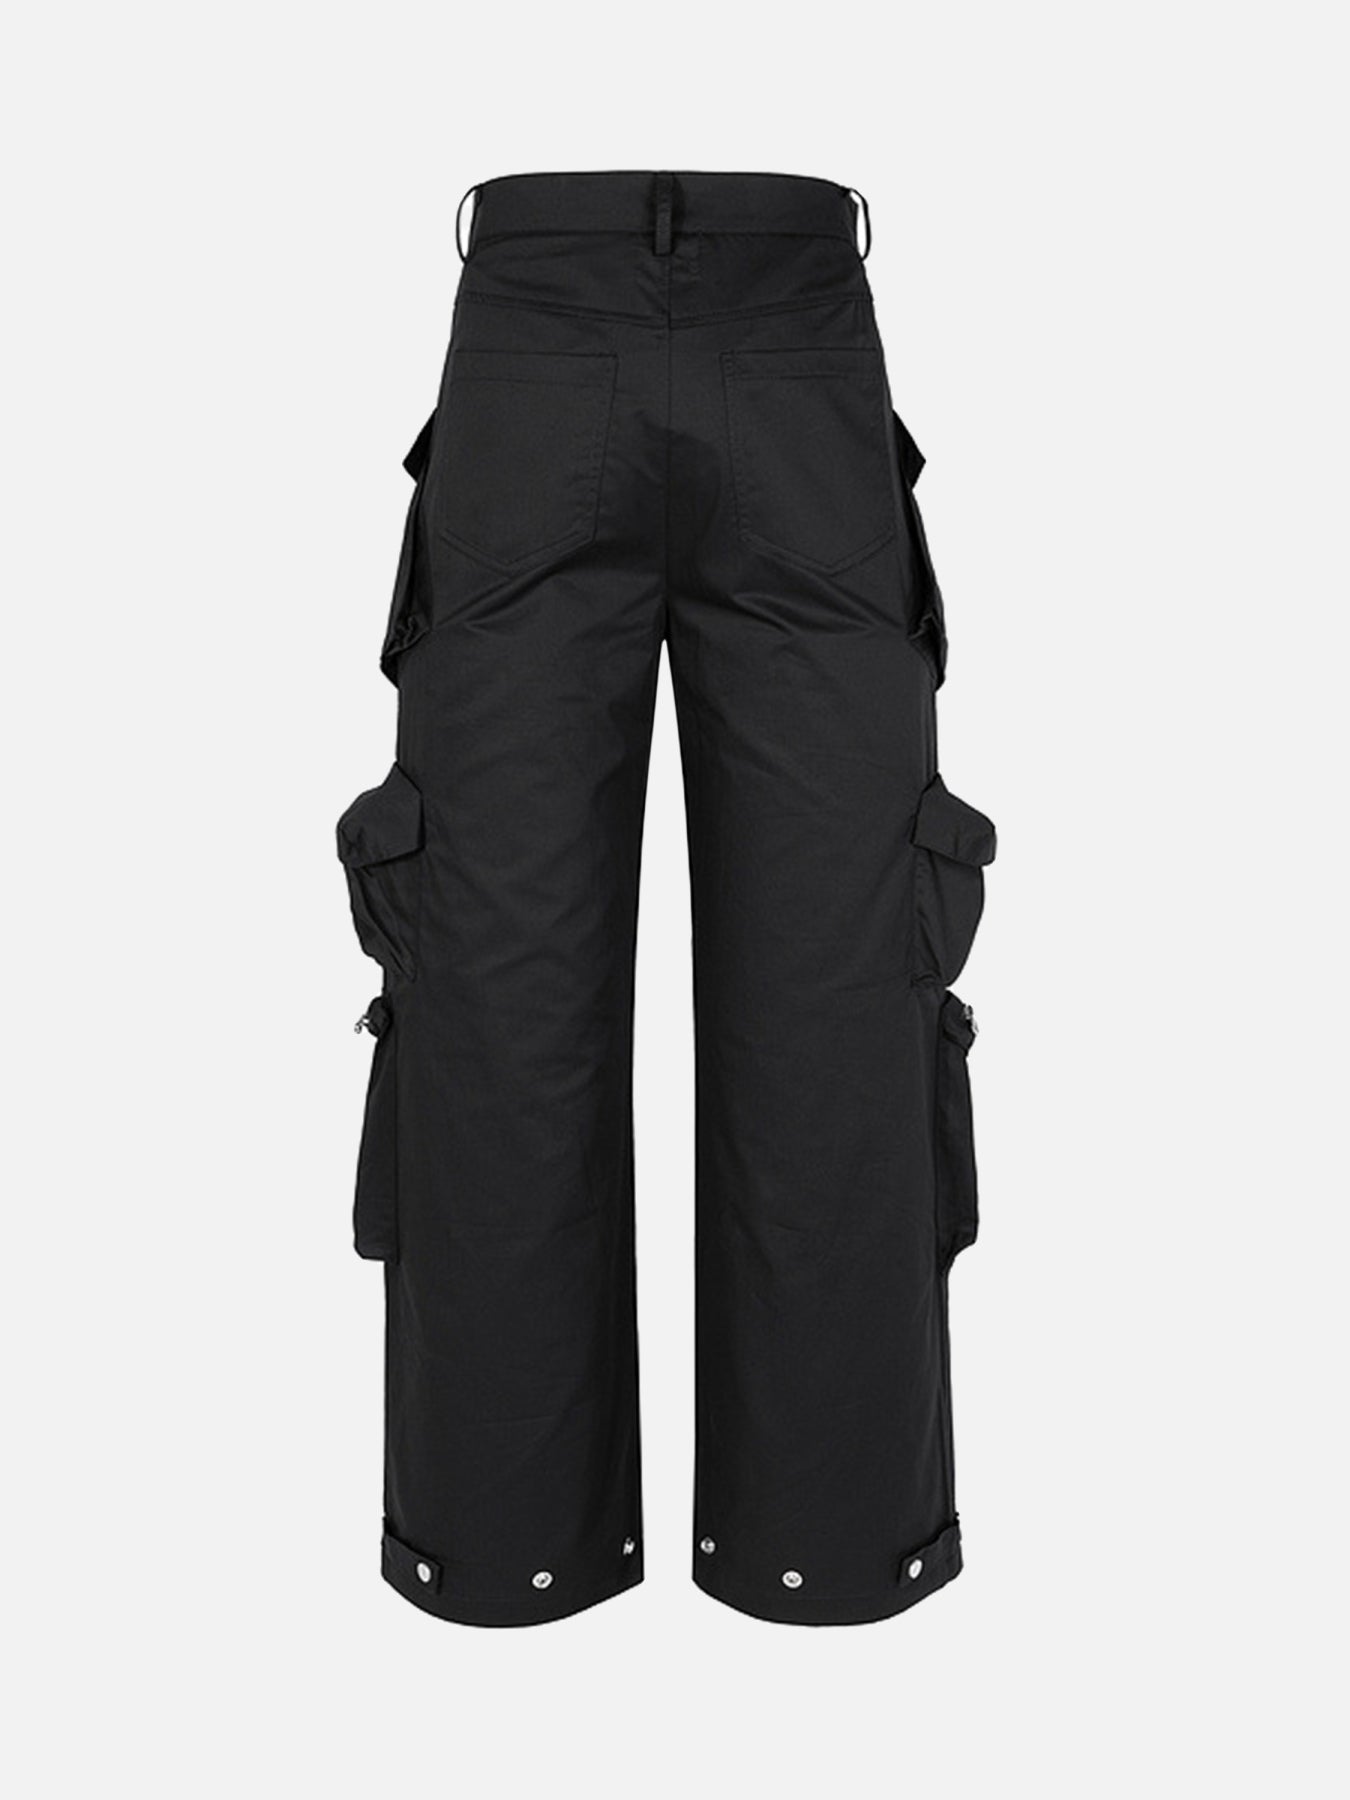 Thesupermade Multi-Pocket Functional Casual Workwear Wide Leg Pants - 1643